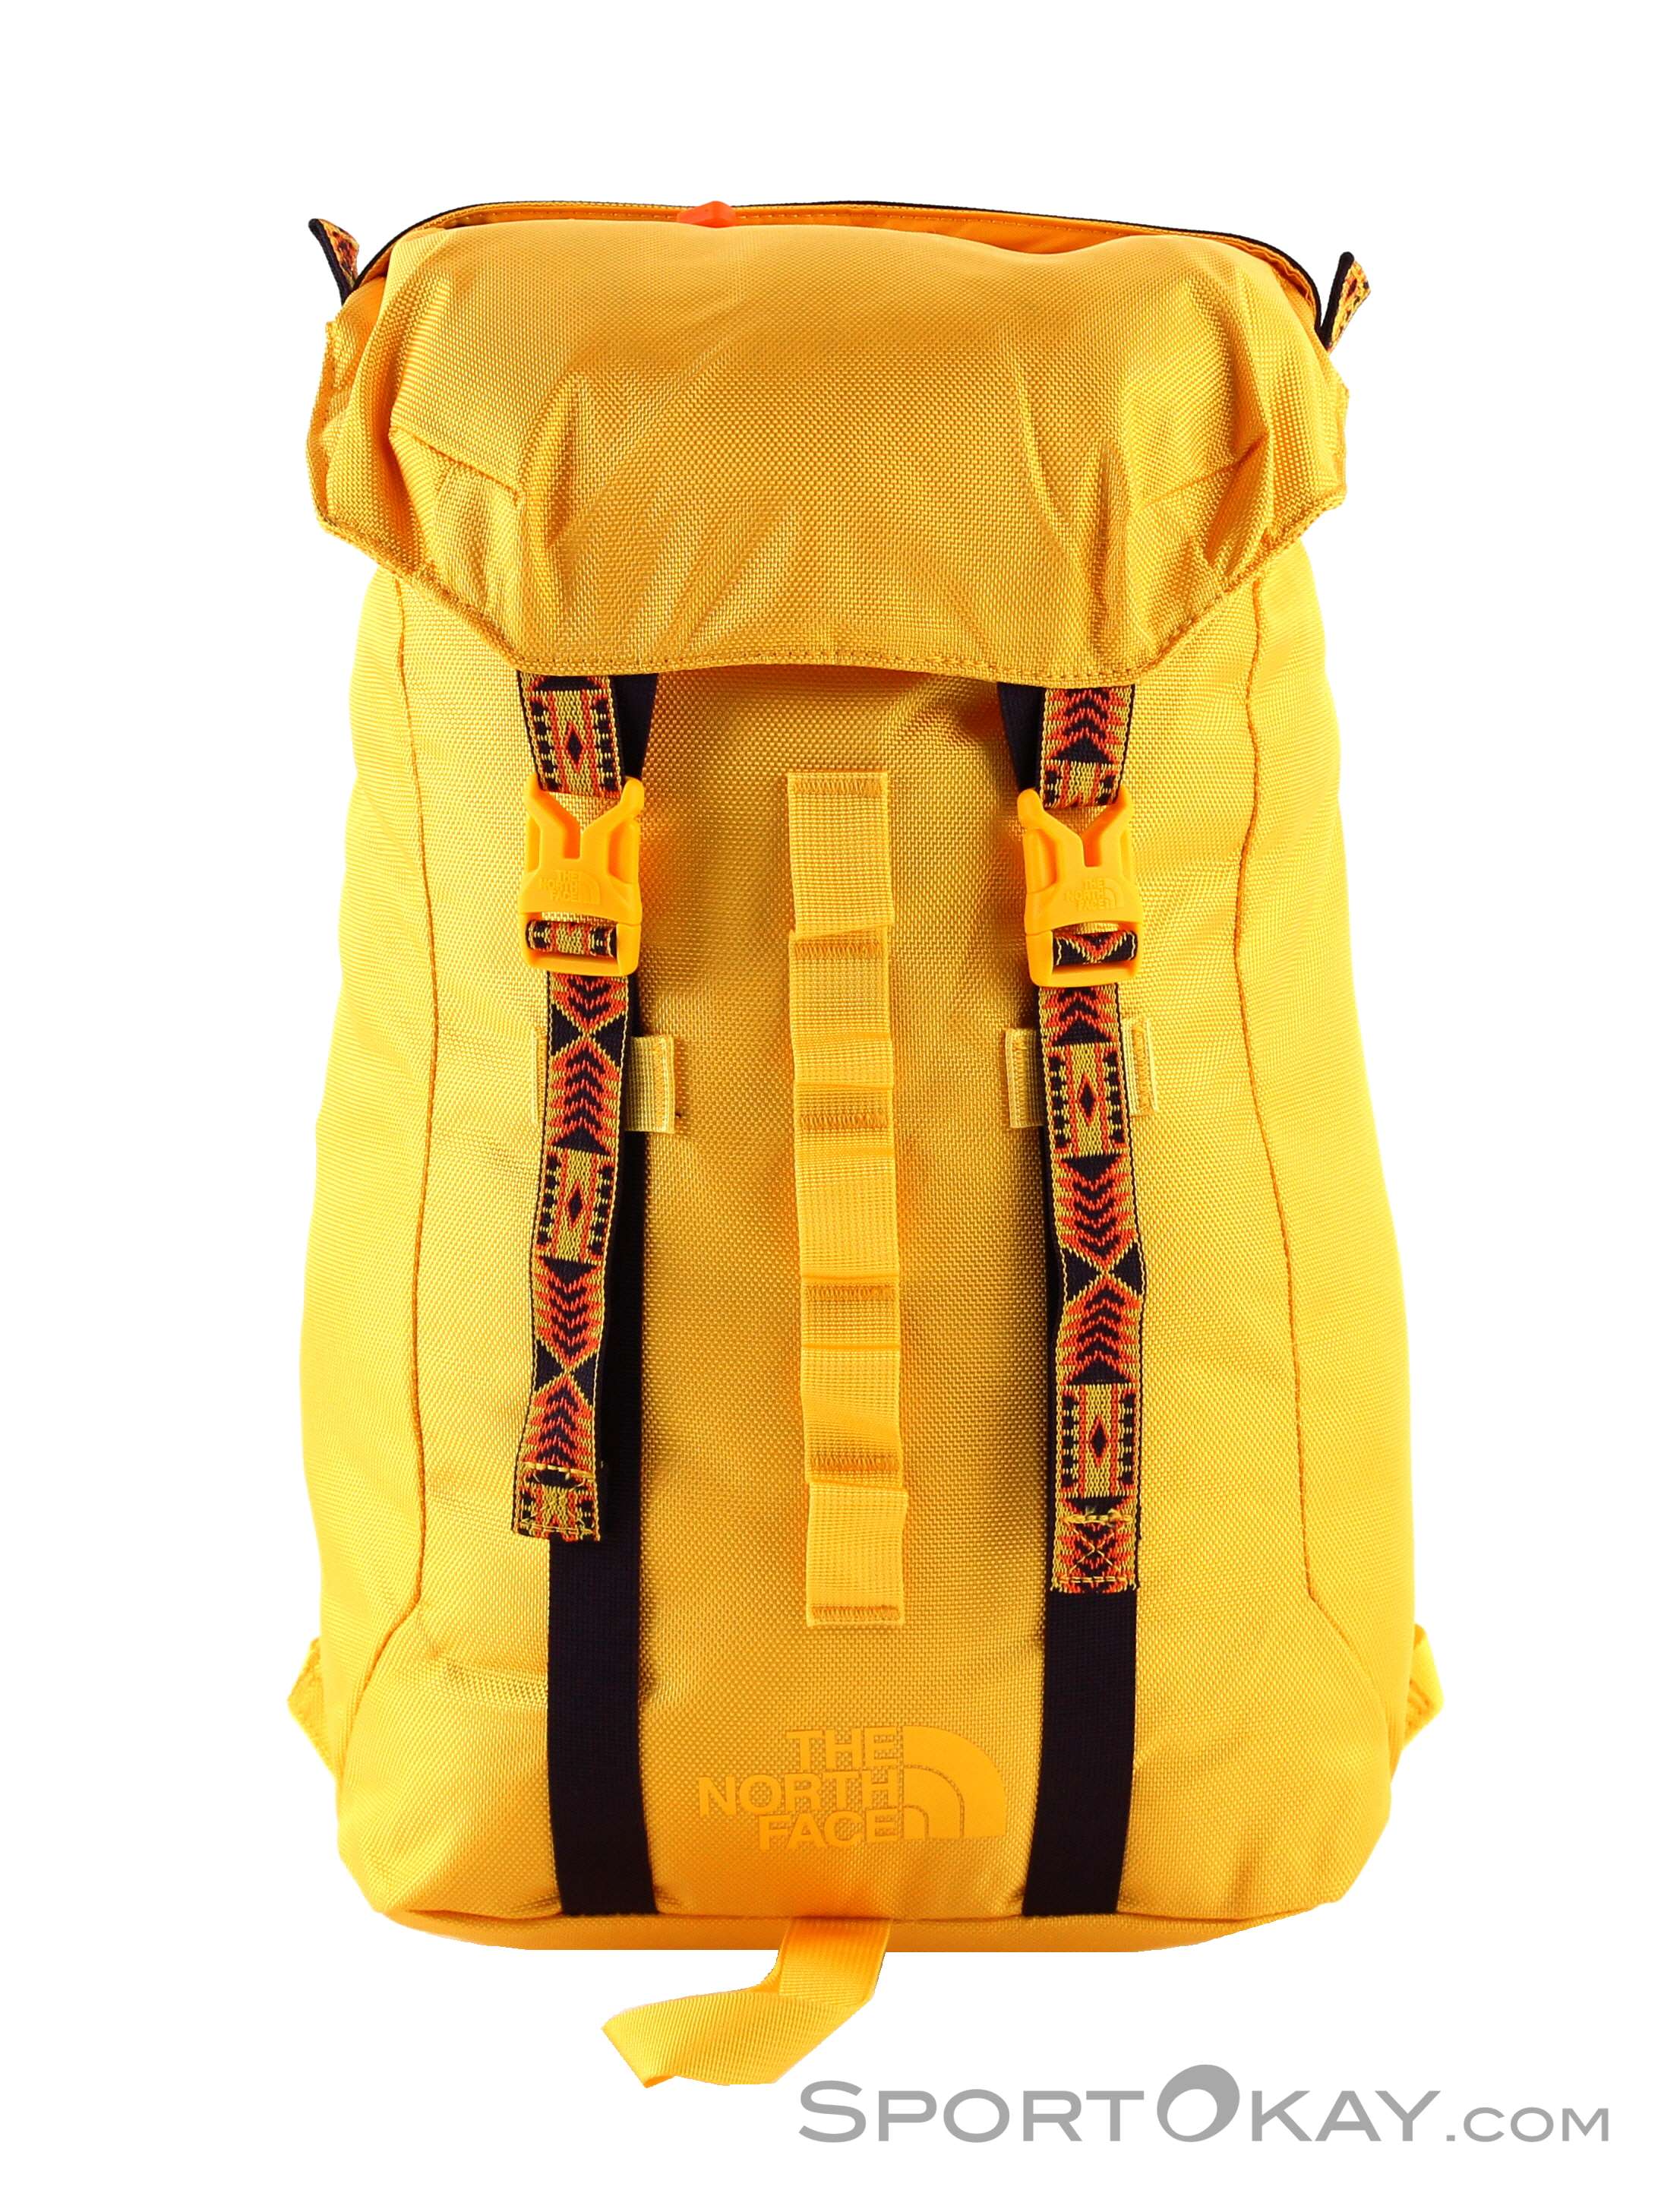 Soms soms Overstijgen het is nutteloos The North Face Lineage 23l Backpack - Bags - Leisure Bags - Fashion - All